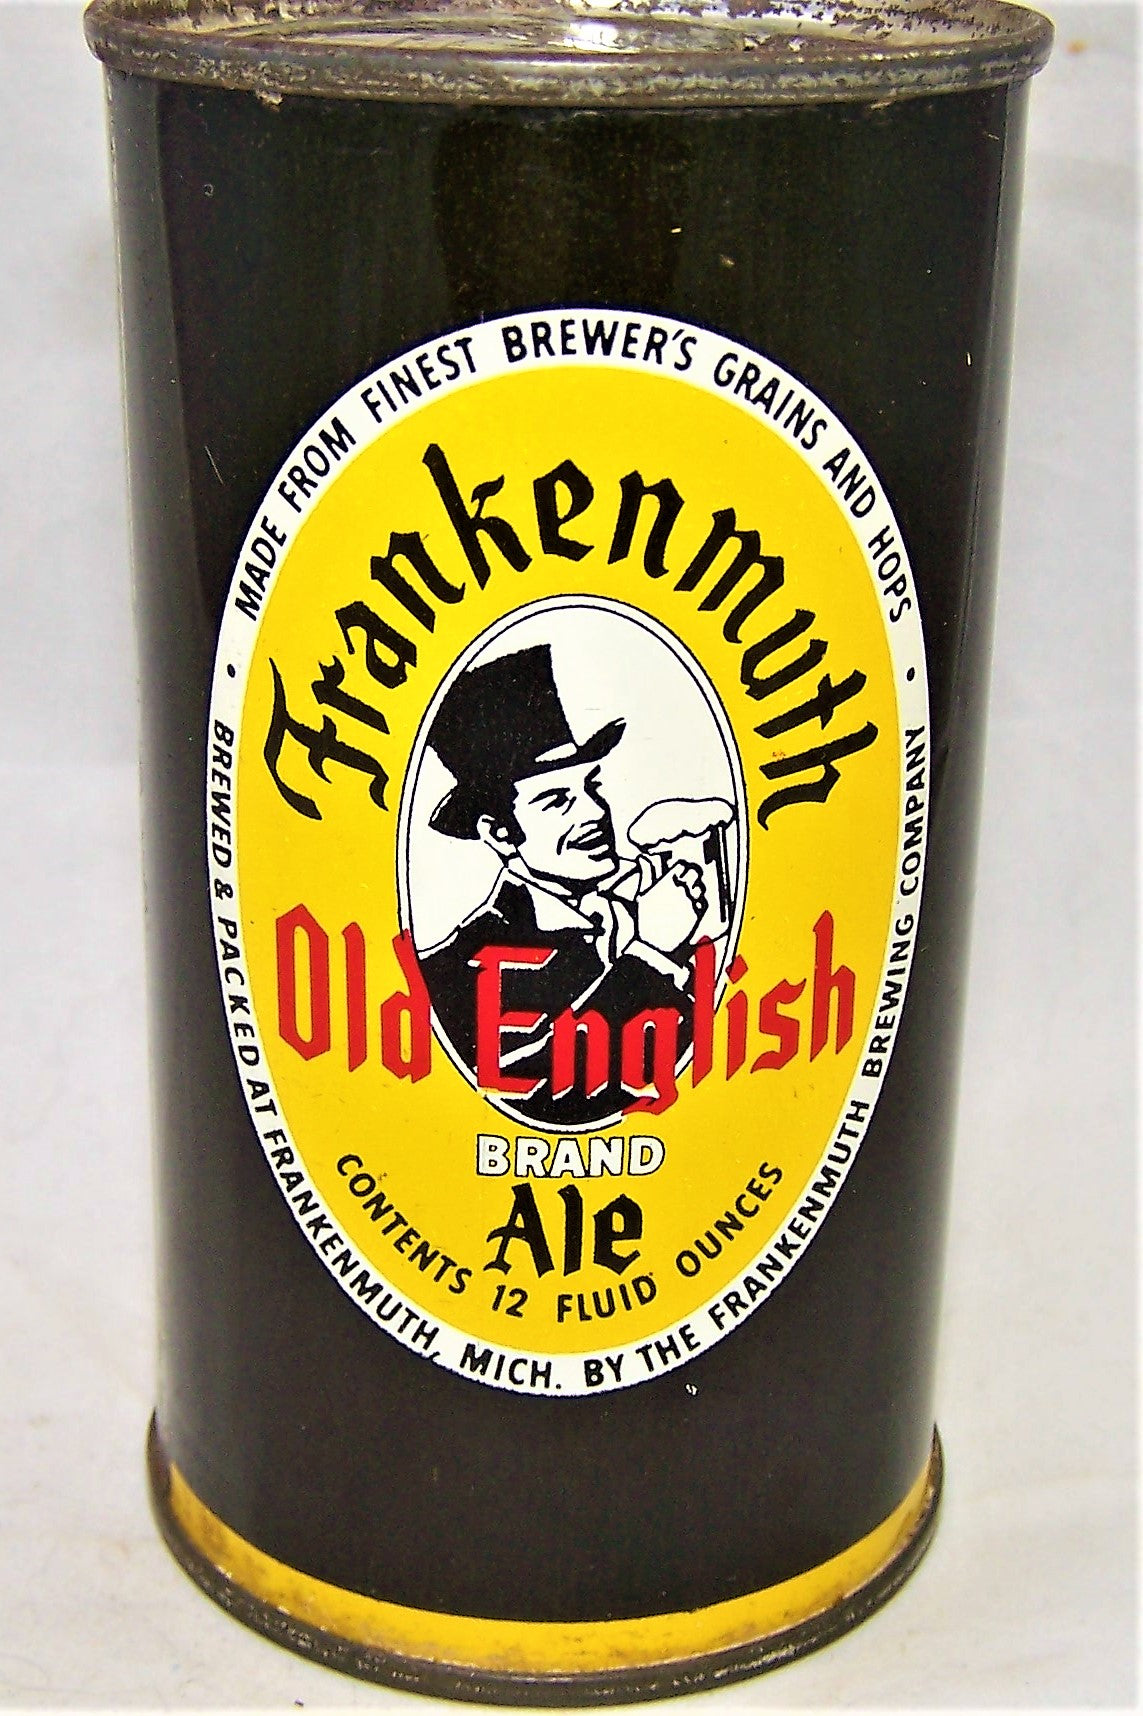 Frankenmuth Old English Brand Ale, USBC 66-24, Grade 1/1+ Sold on 02/08/19